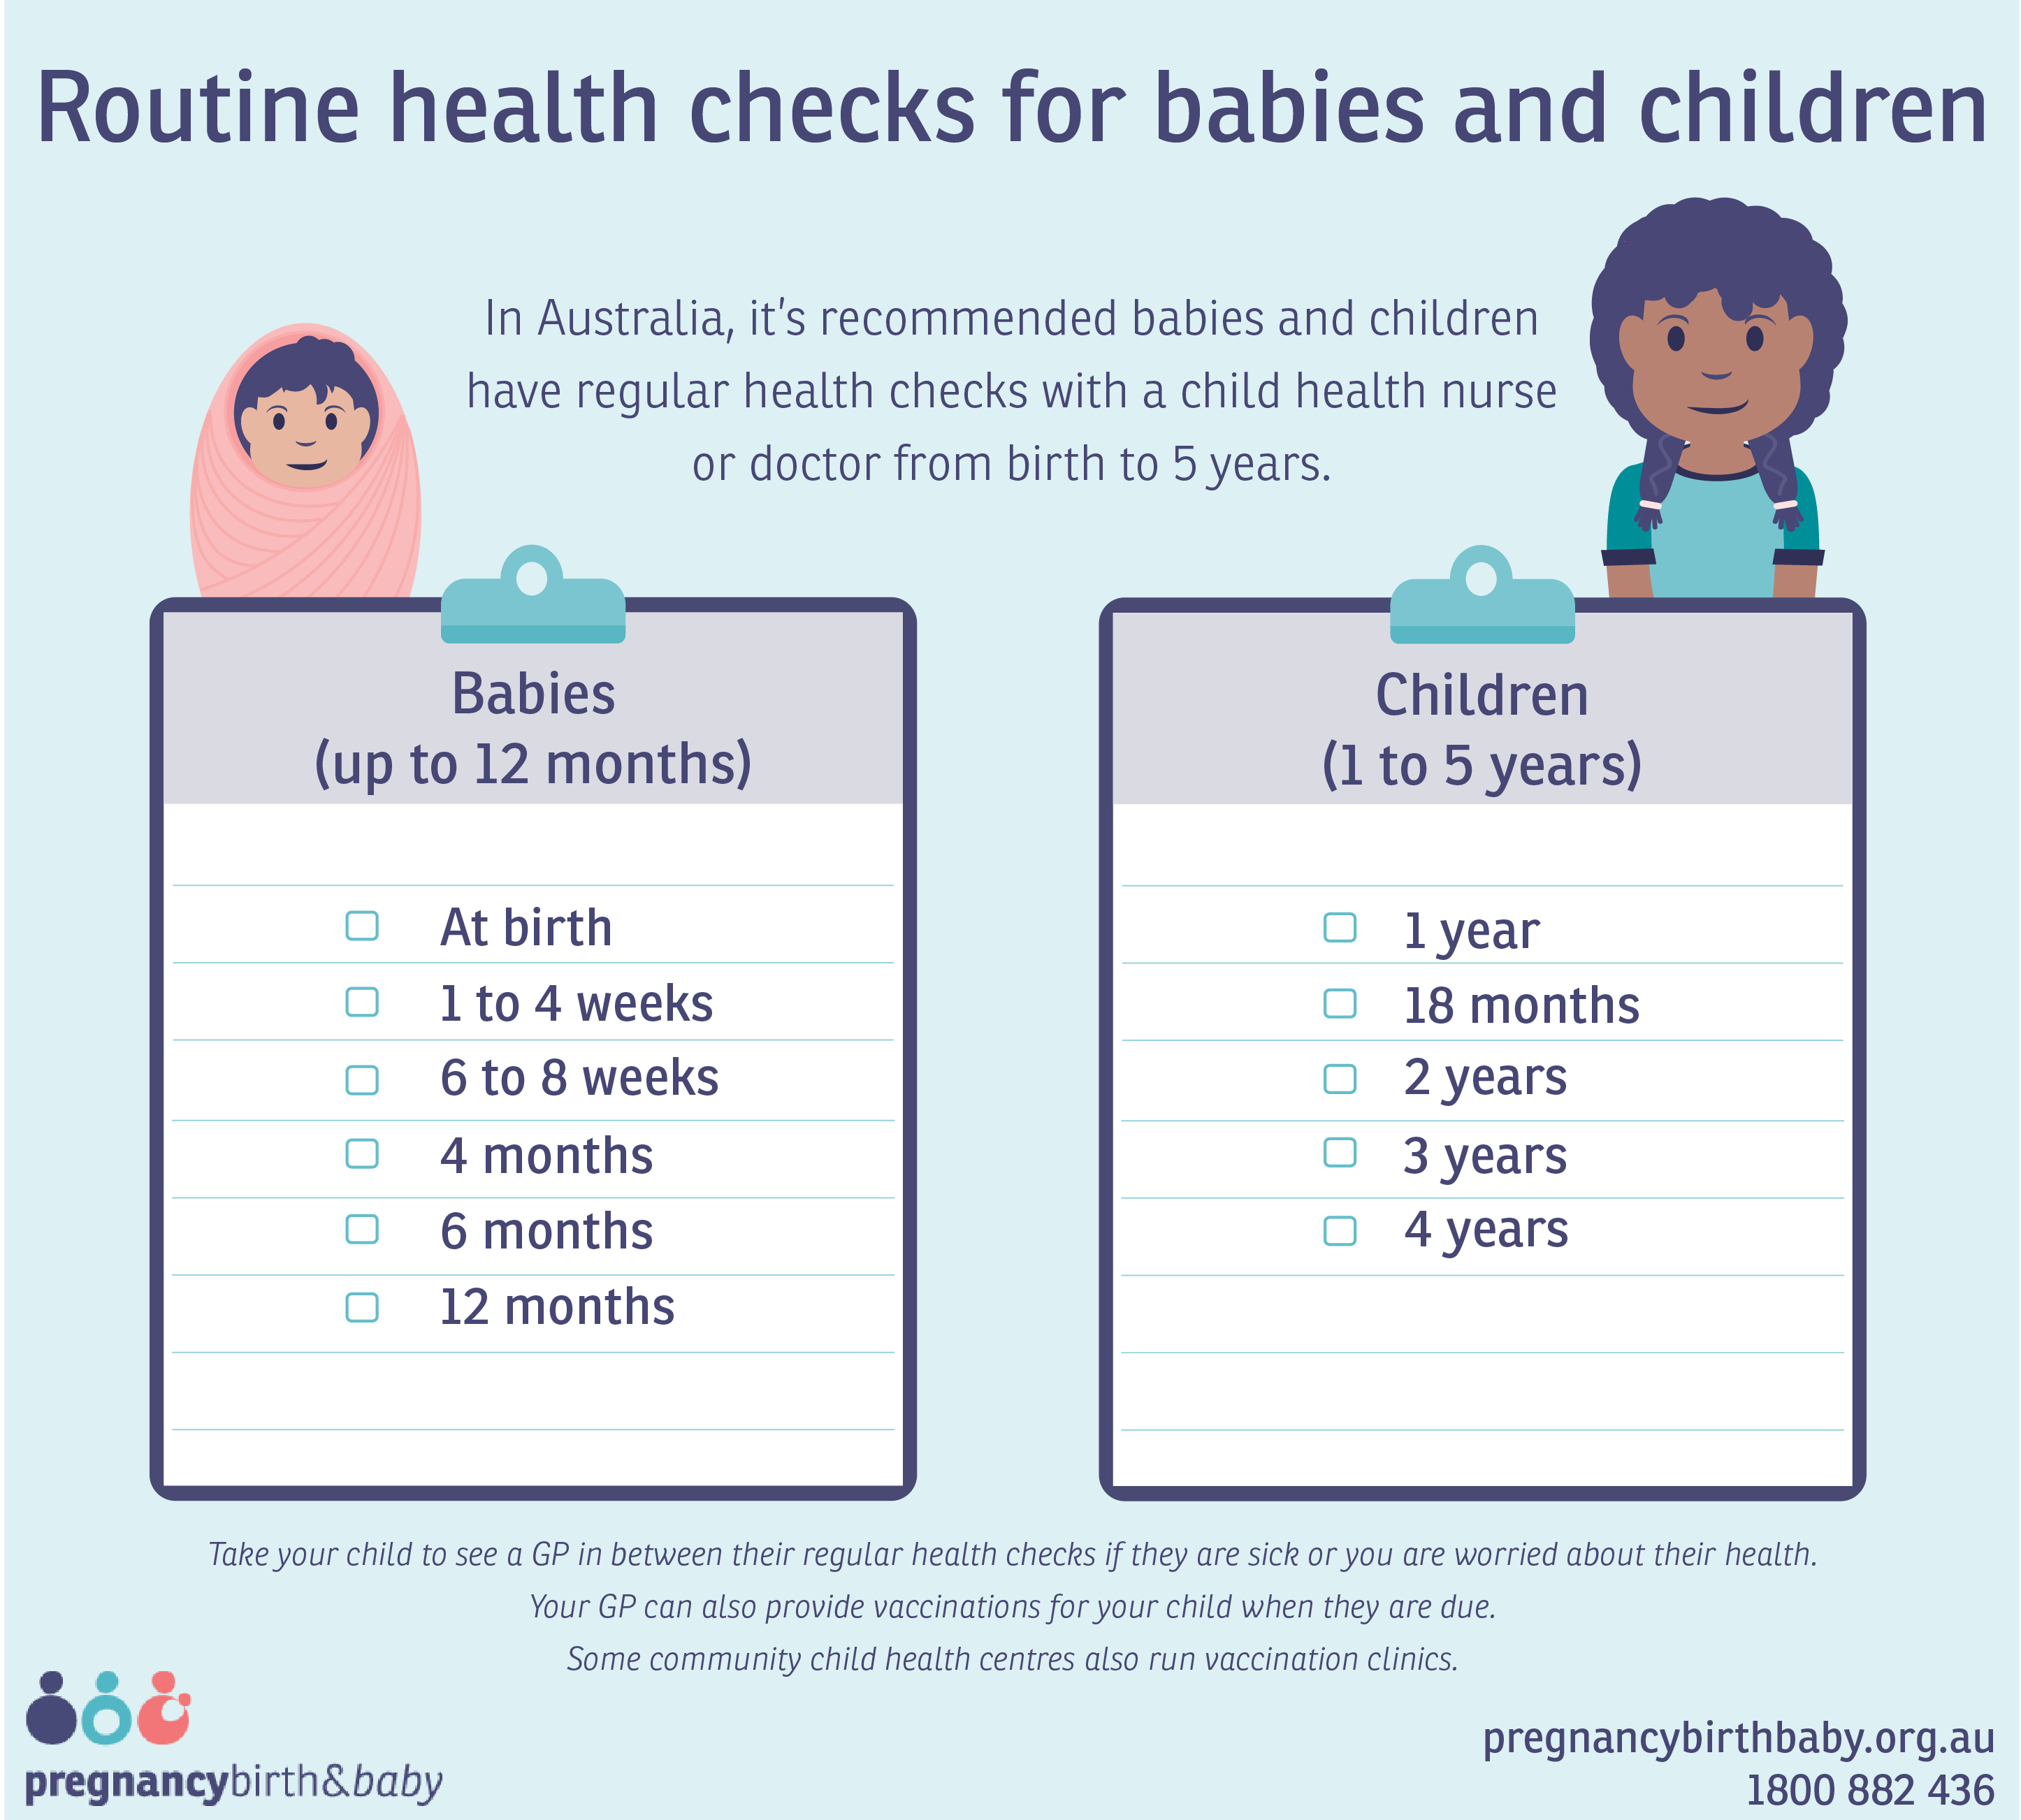 Routine health checks for babies and children